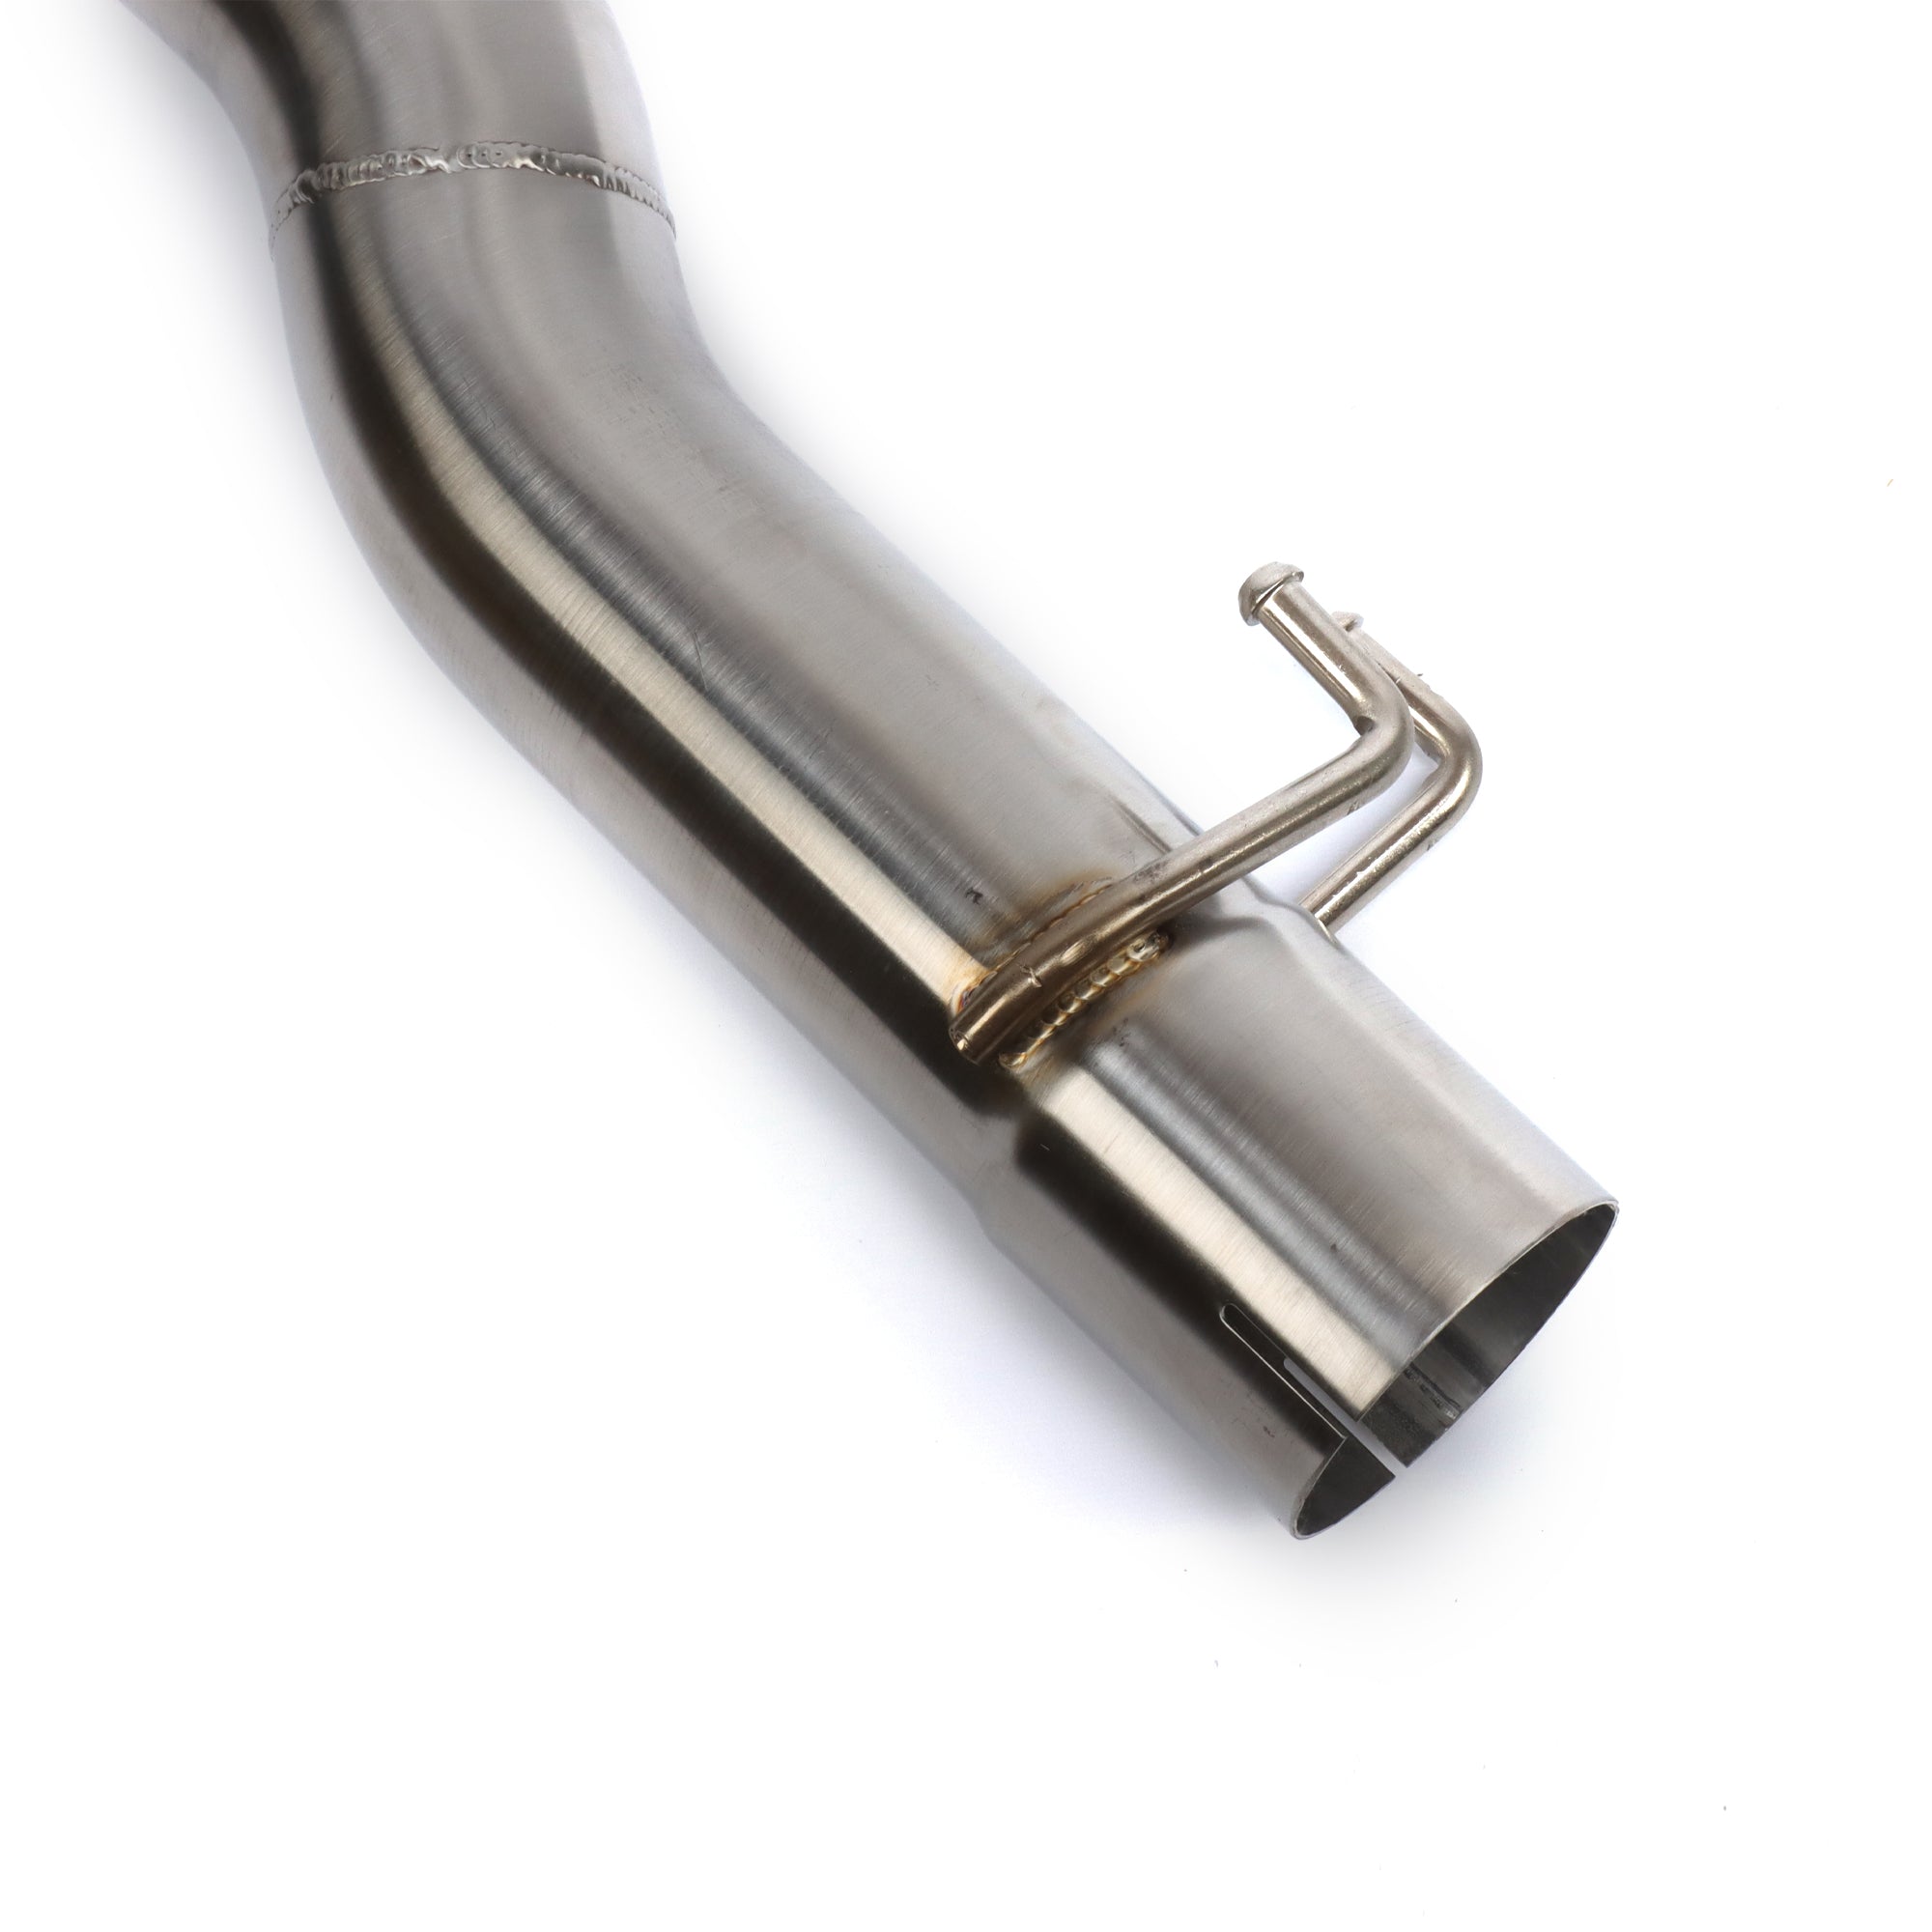 DC Sports Exhaust System for 22+ Civic Si & 22+ Integra